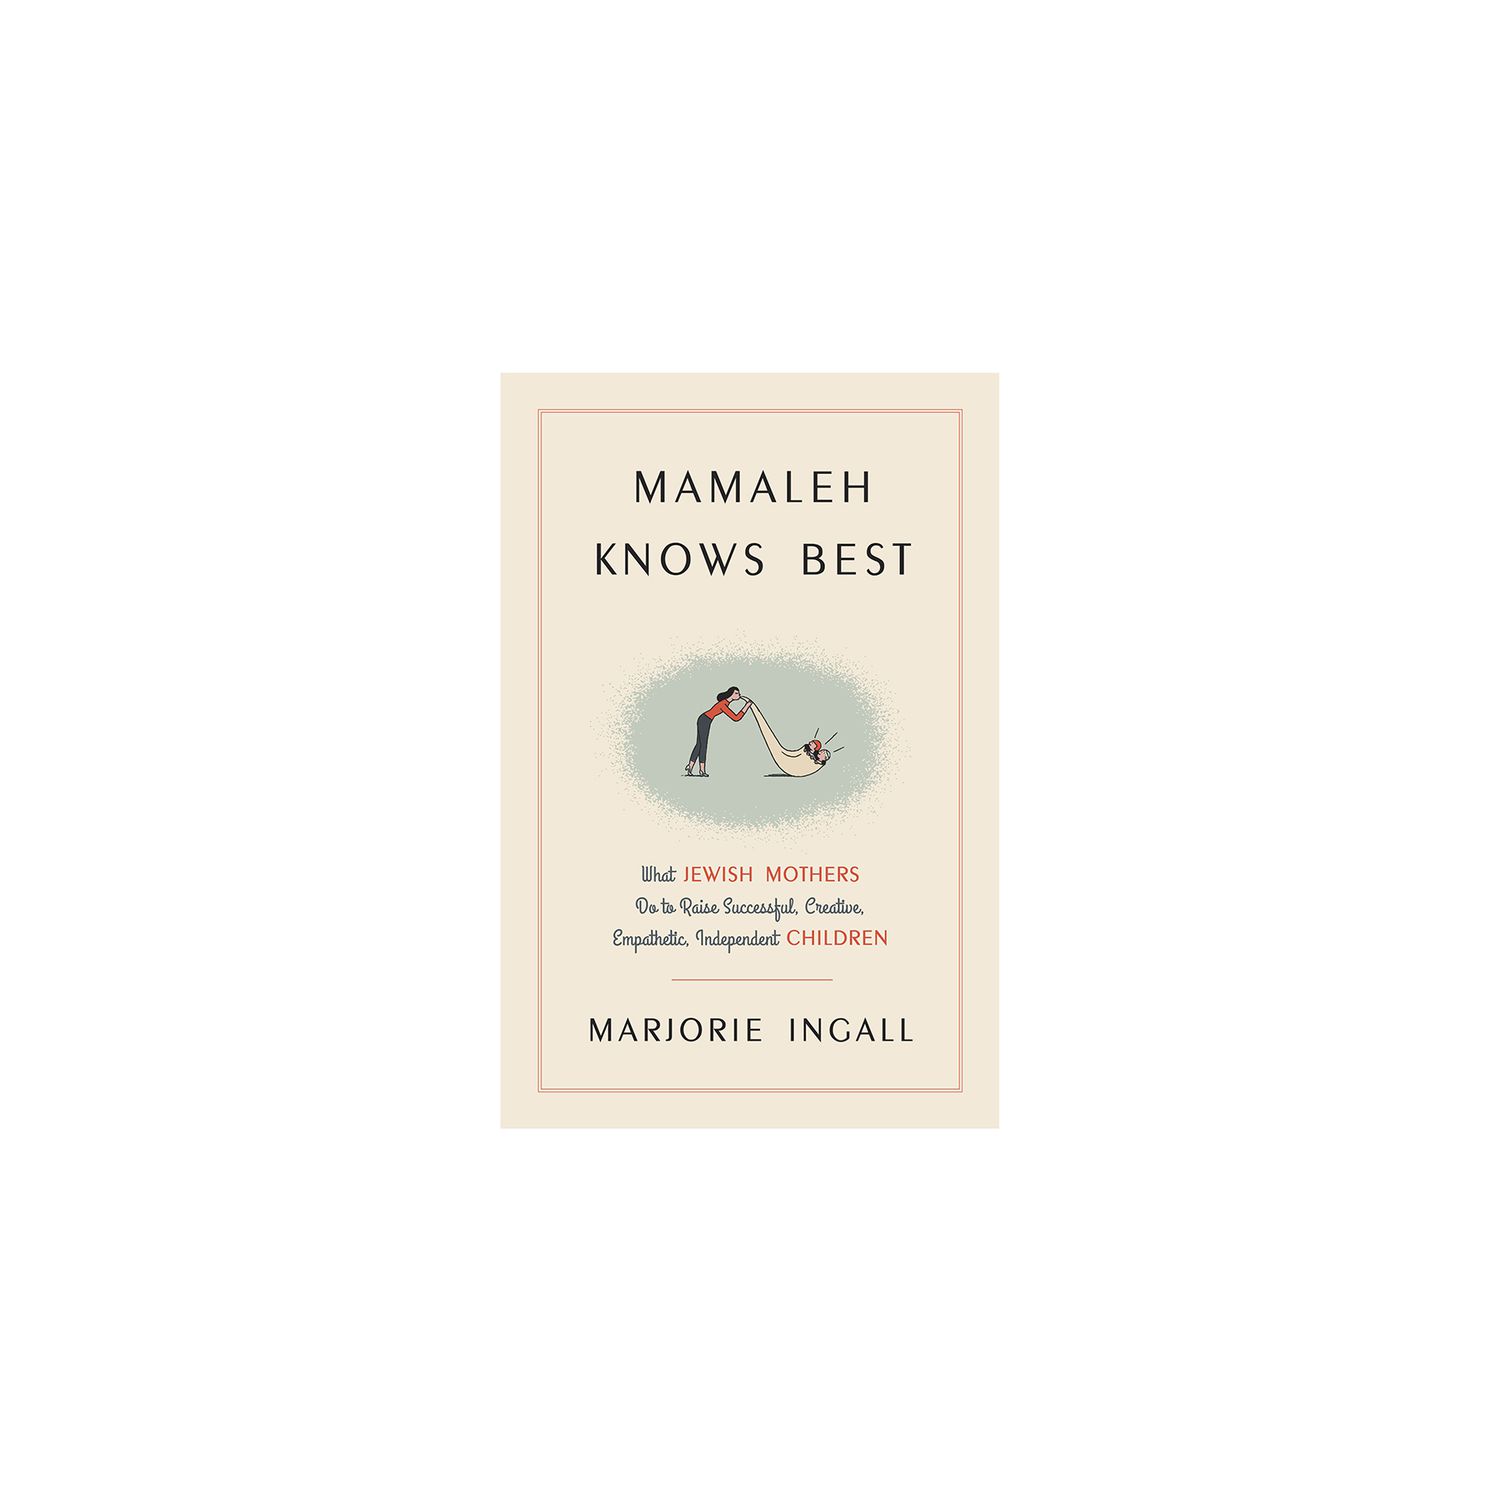 Mamaleh Knows Best, by Marjorie Ingall